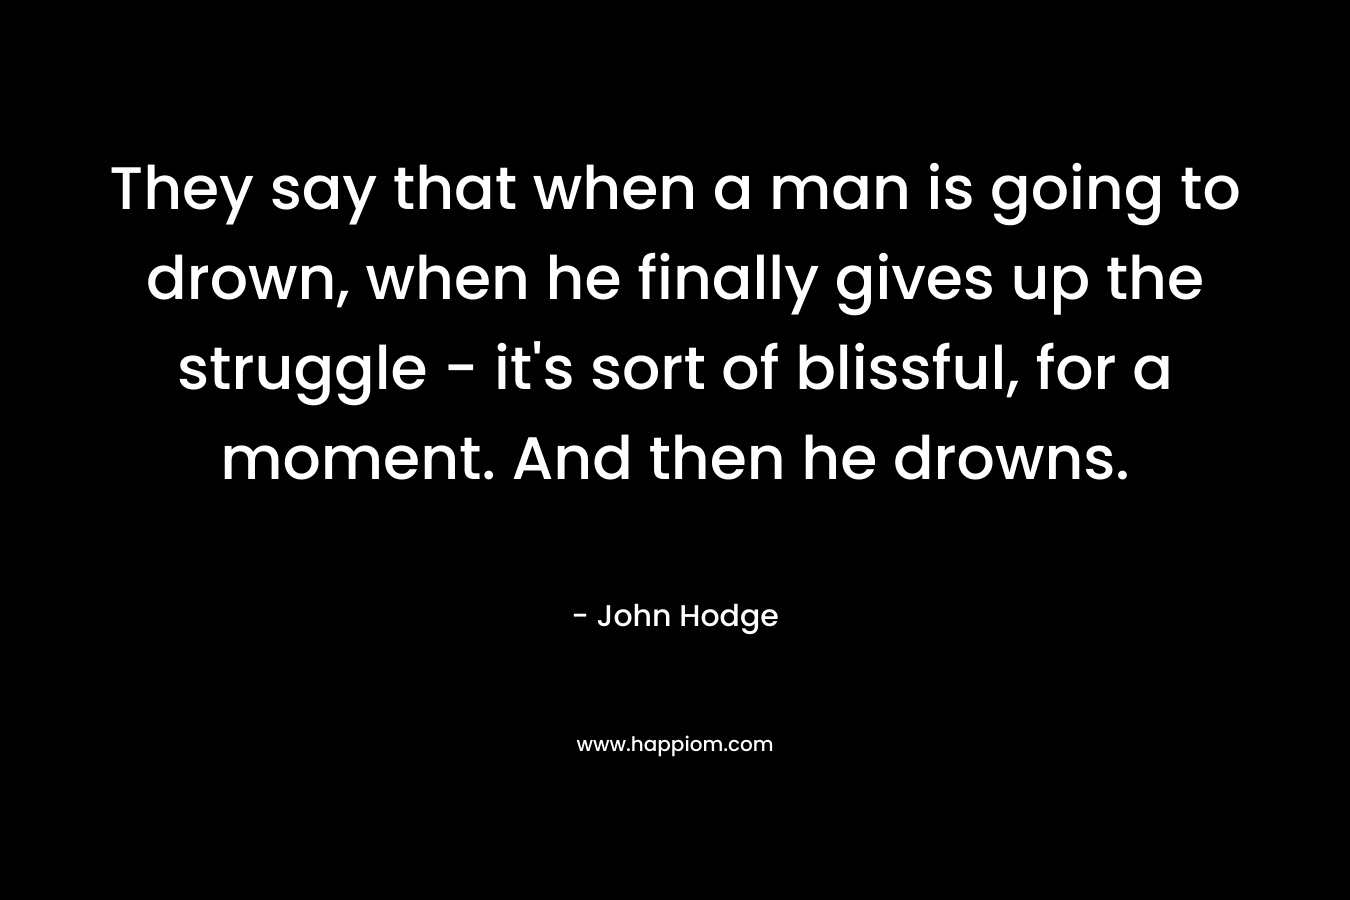 They say that when a man is going to drown, when he finally gives up the struggle – it’s sort of blissful, for a moment. And then he drowns. – John Hodge